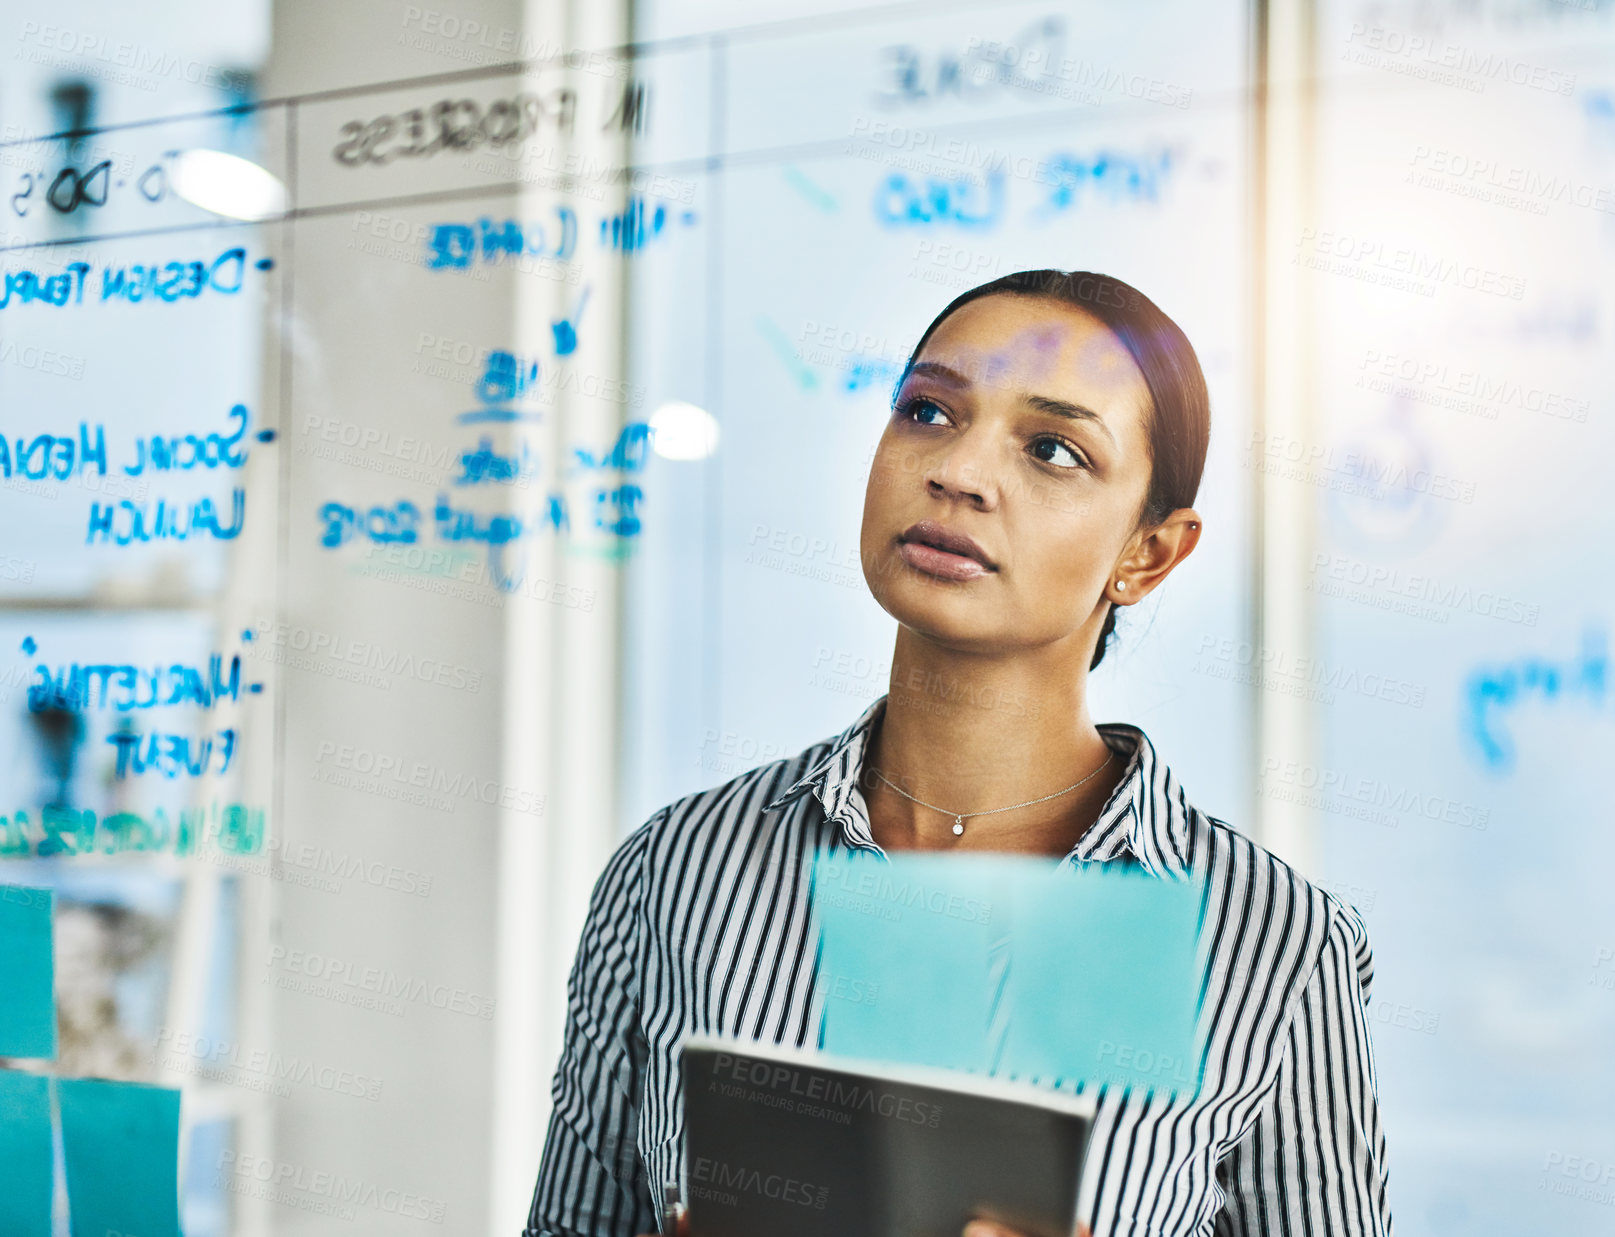 Buy stock photo Shot of a young businesswoman using a digital tablet while brainstorming on a glass wall in an office